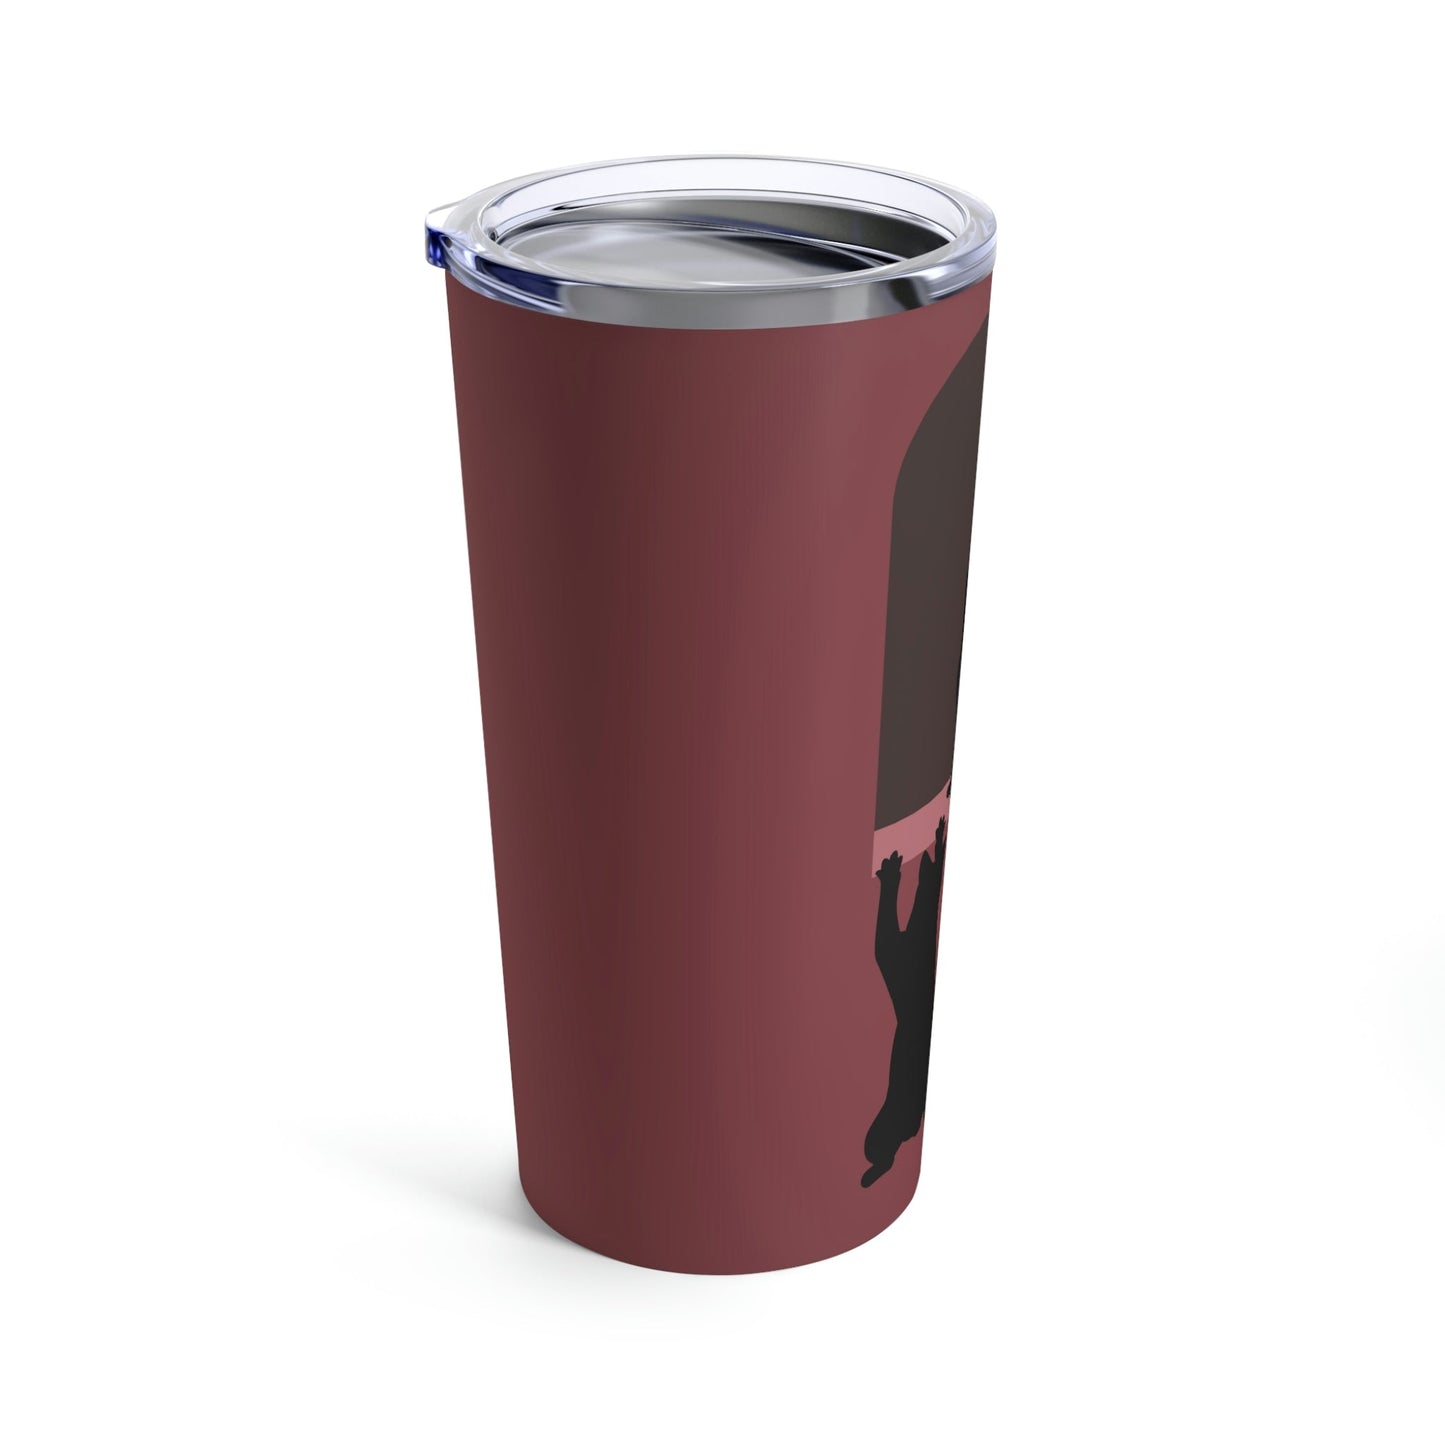 Romeow and Mewliet. William Shakespeare Romeo And Juliet Black Cat Burgundy Stainless Steel Hot or Cold Vacuum Tumbler 20oz Ichaku [Perfect Gifts Selection]